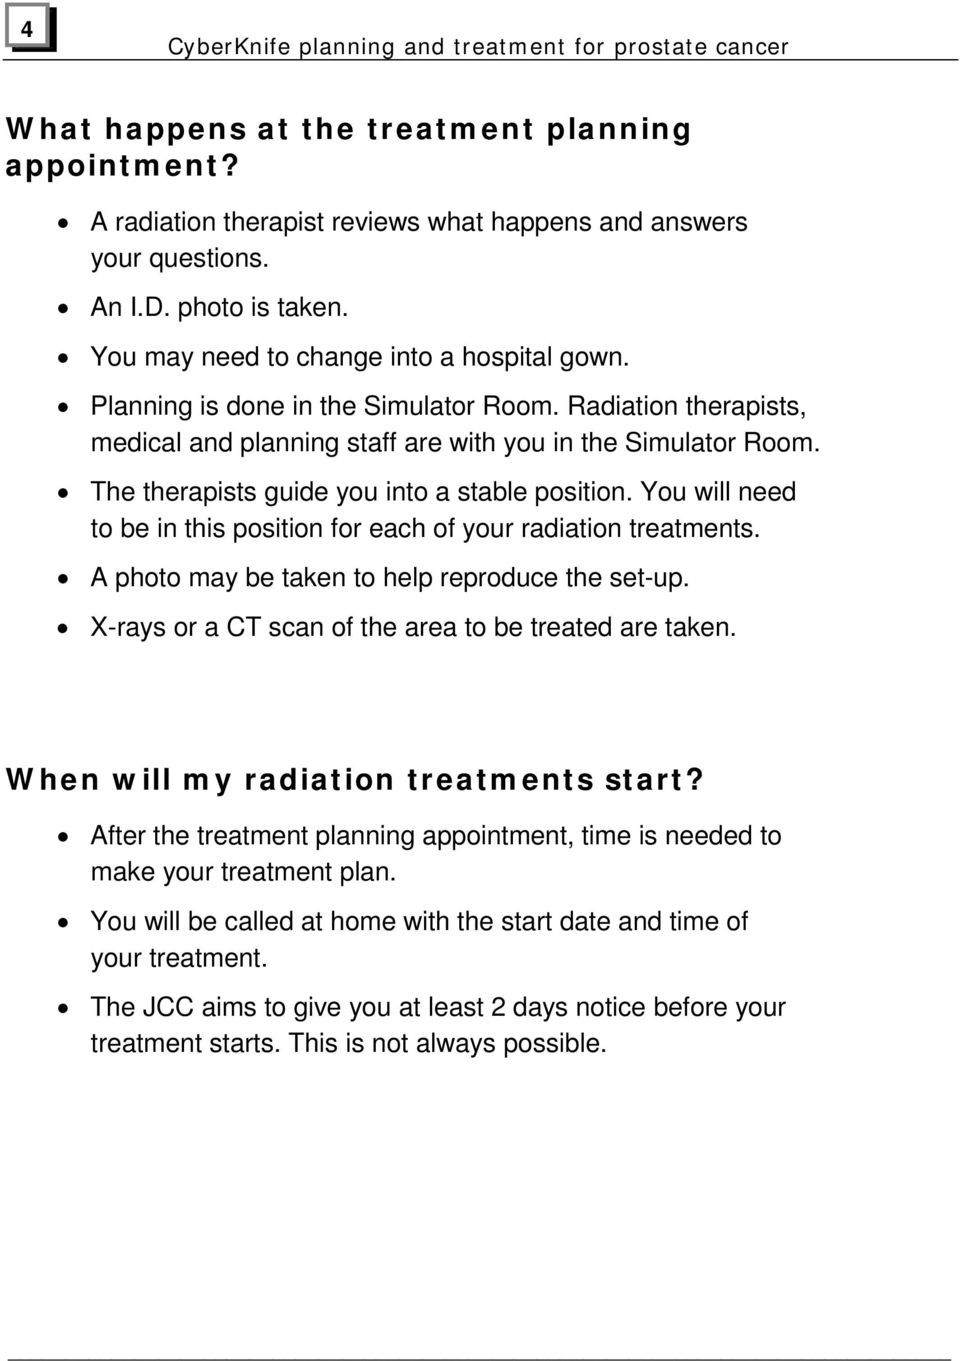 The therapists guide you into a stable position. You will need to be in this position for each of your radiation treatments. A photo may be taken to help reproduce the set-up.